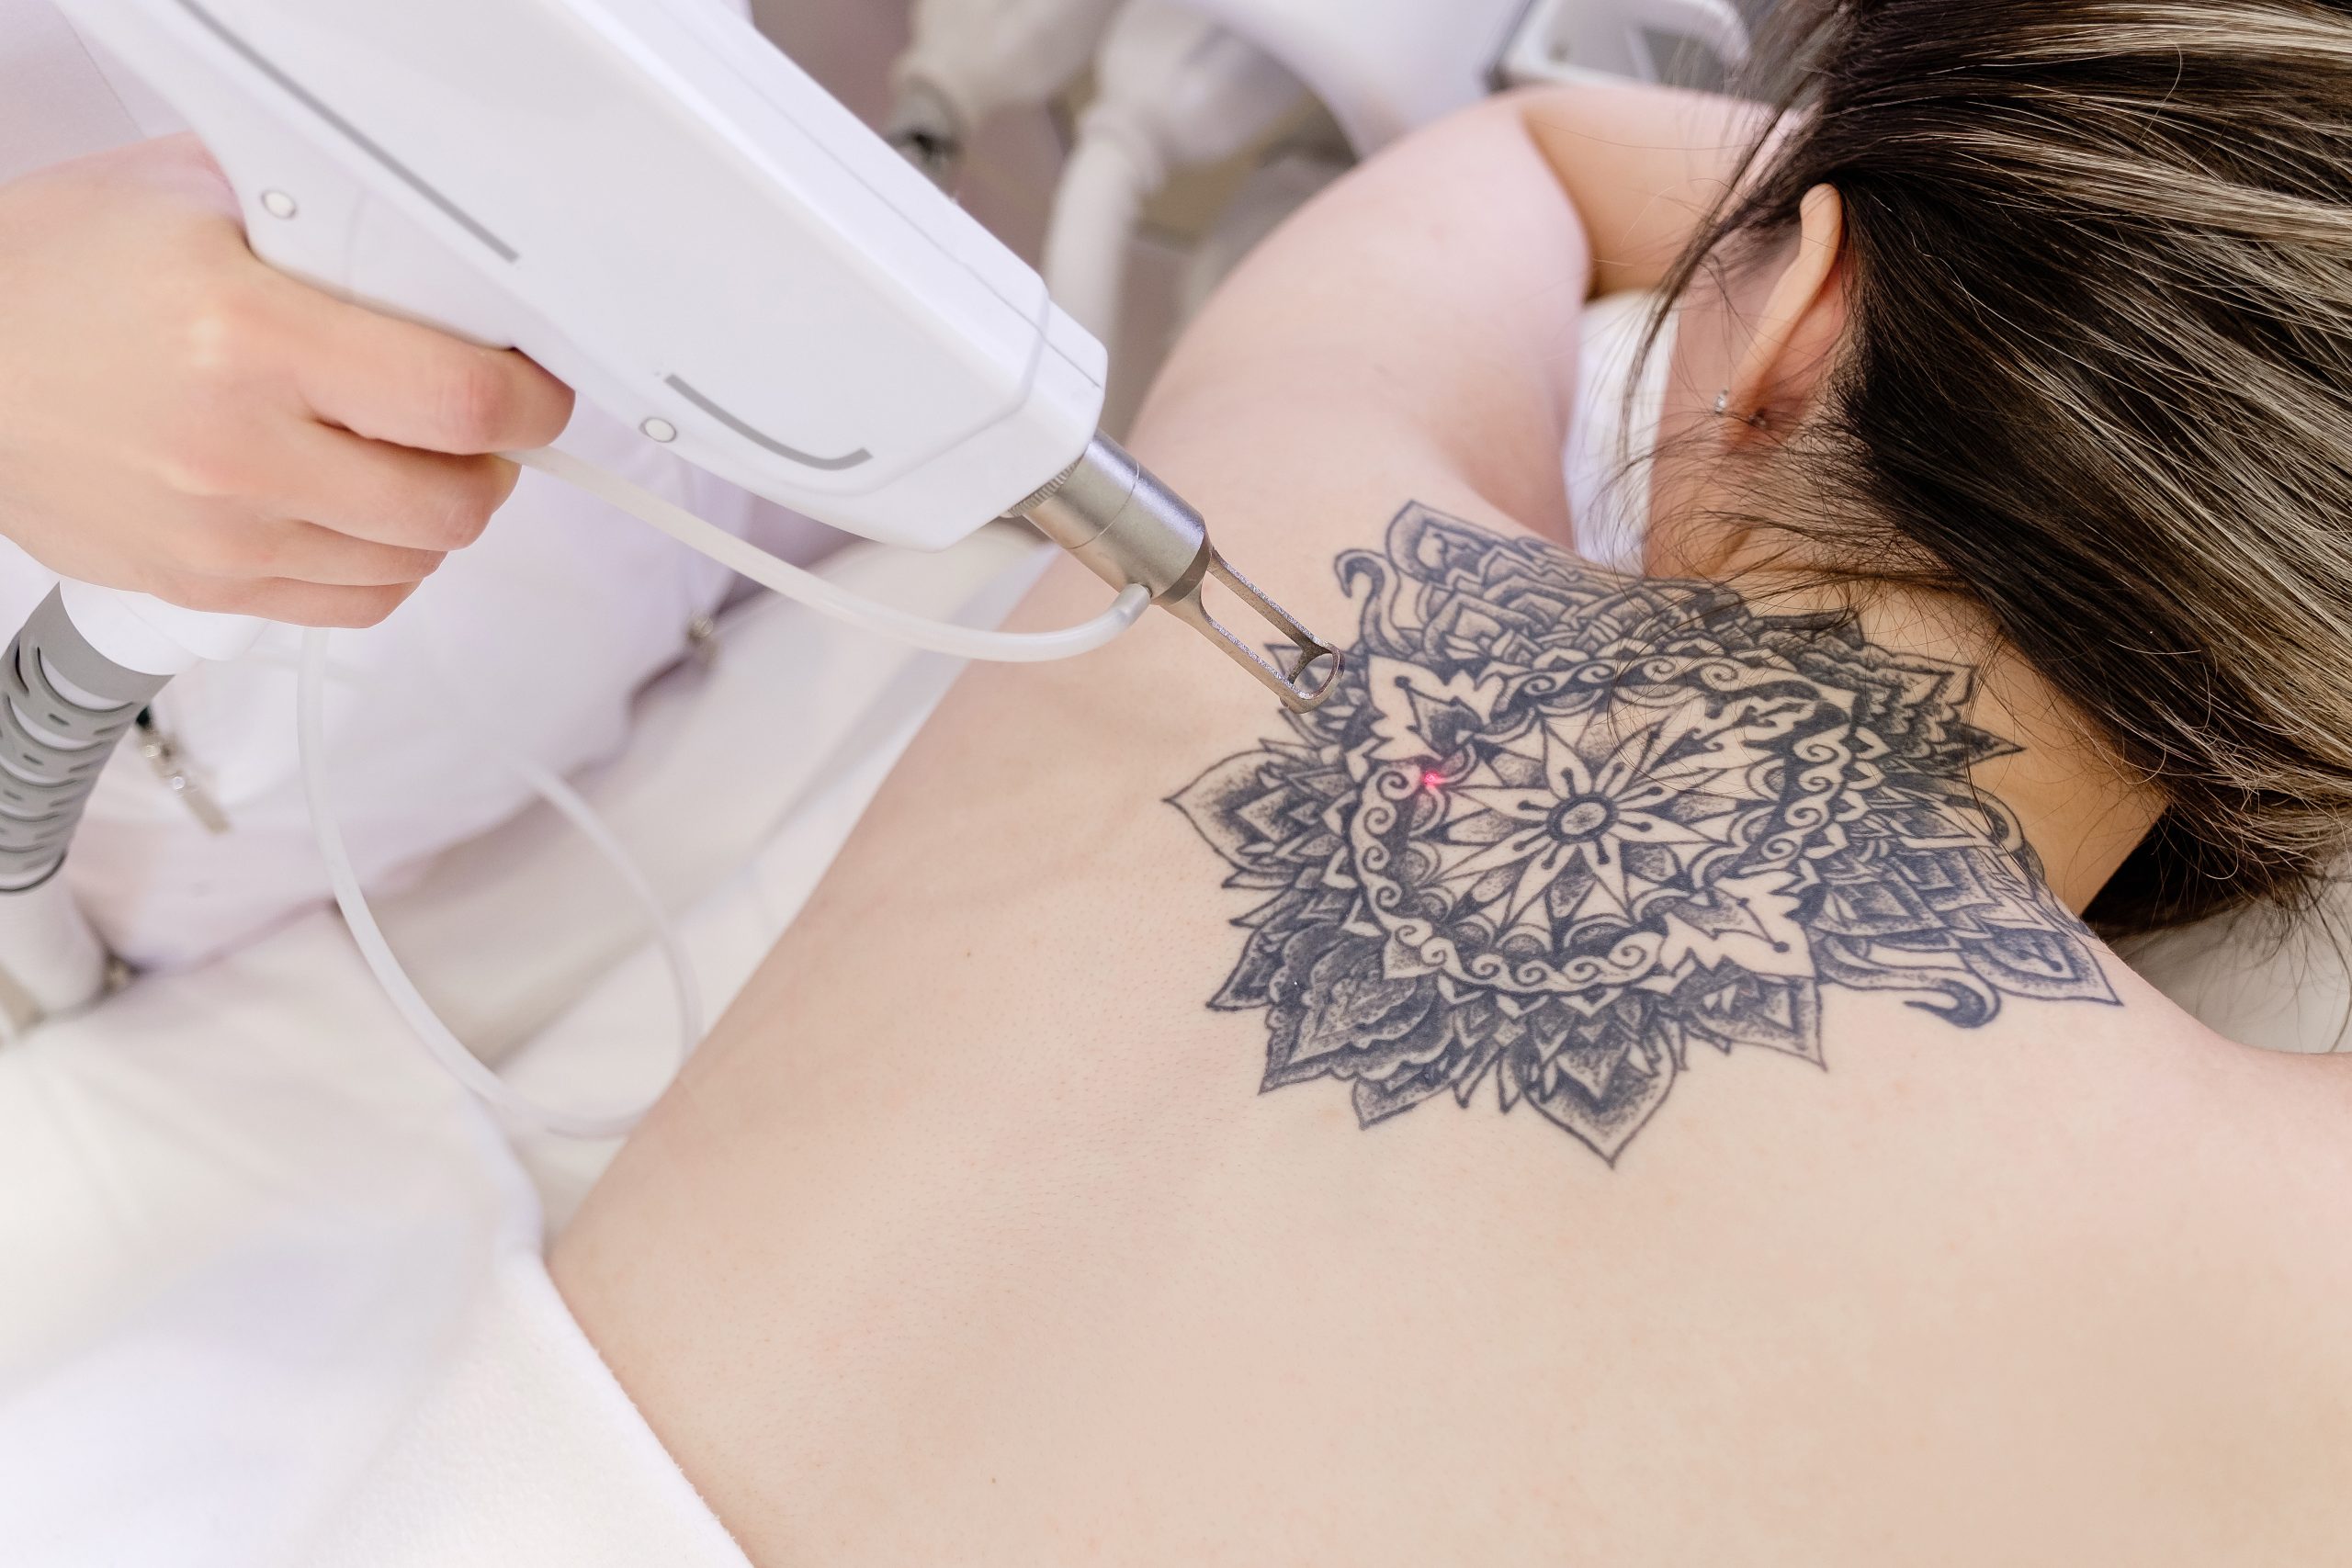 Tattoo Removal Near Me | Tattoo Removal in Tucson, AZ | Medical Spa